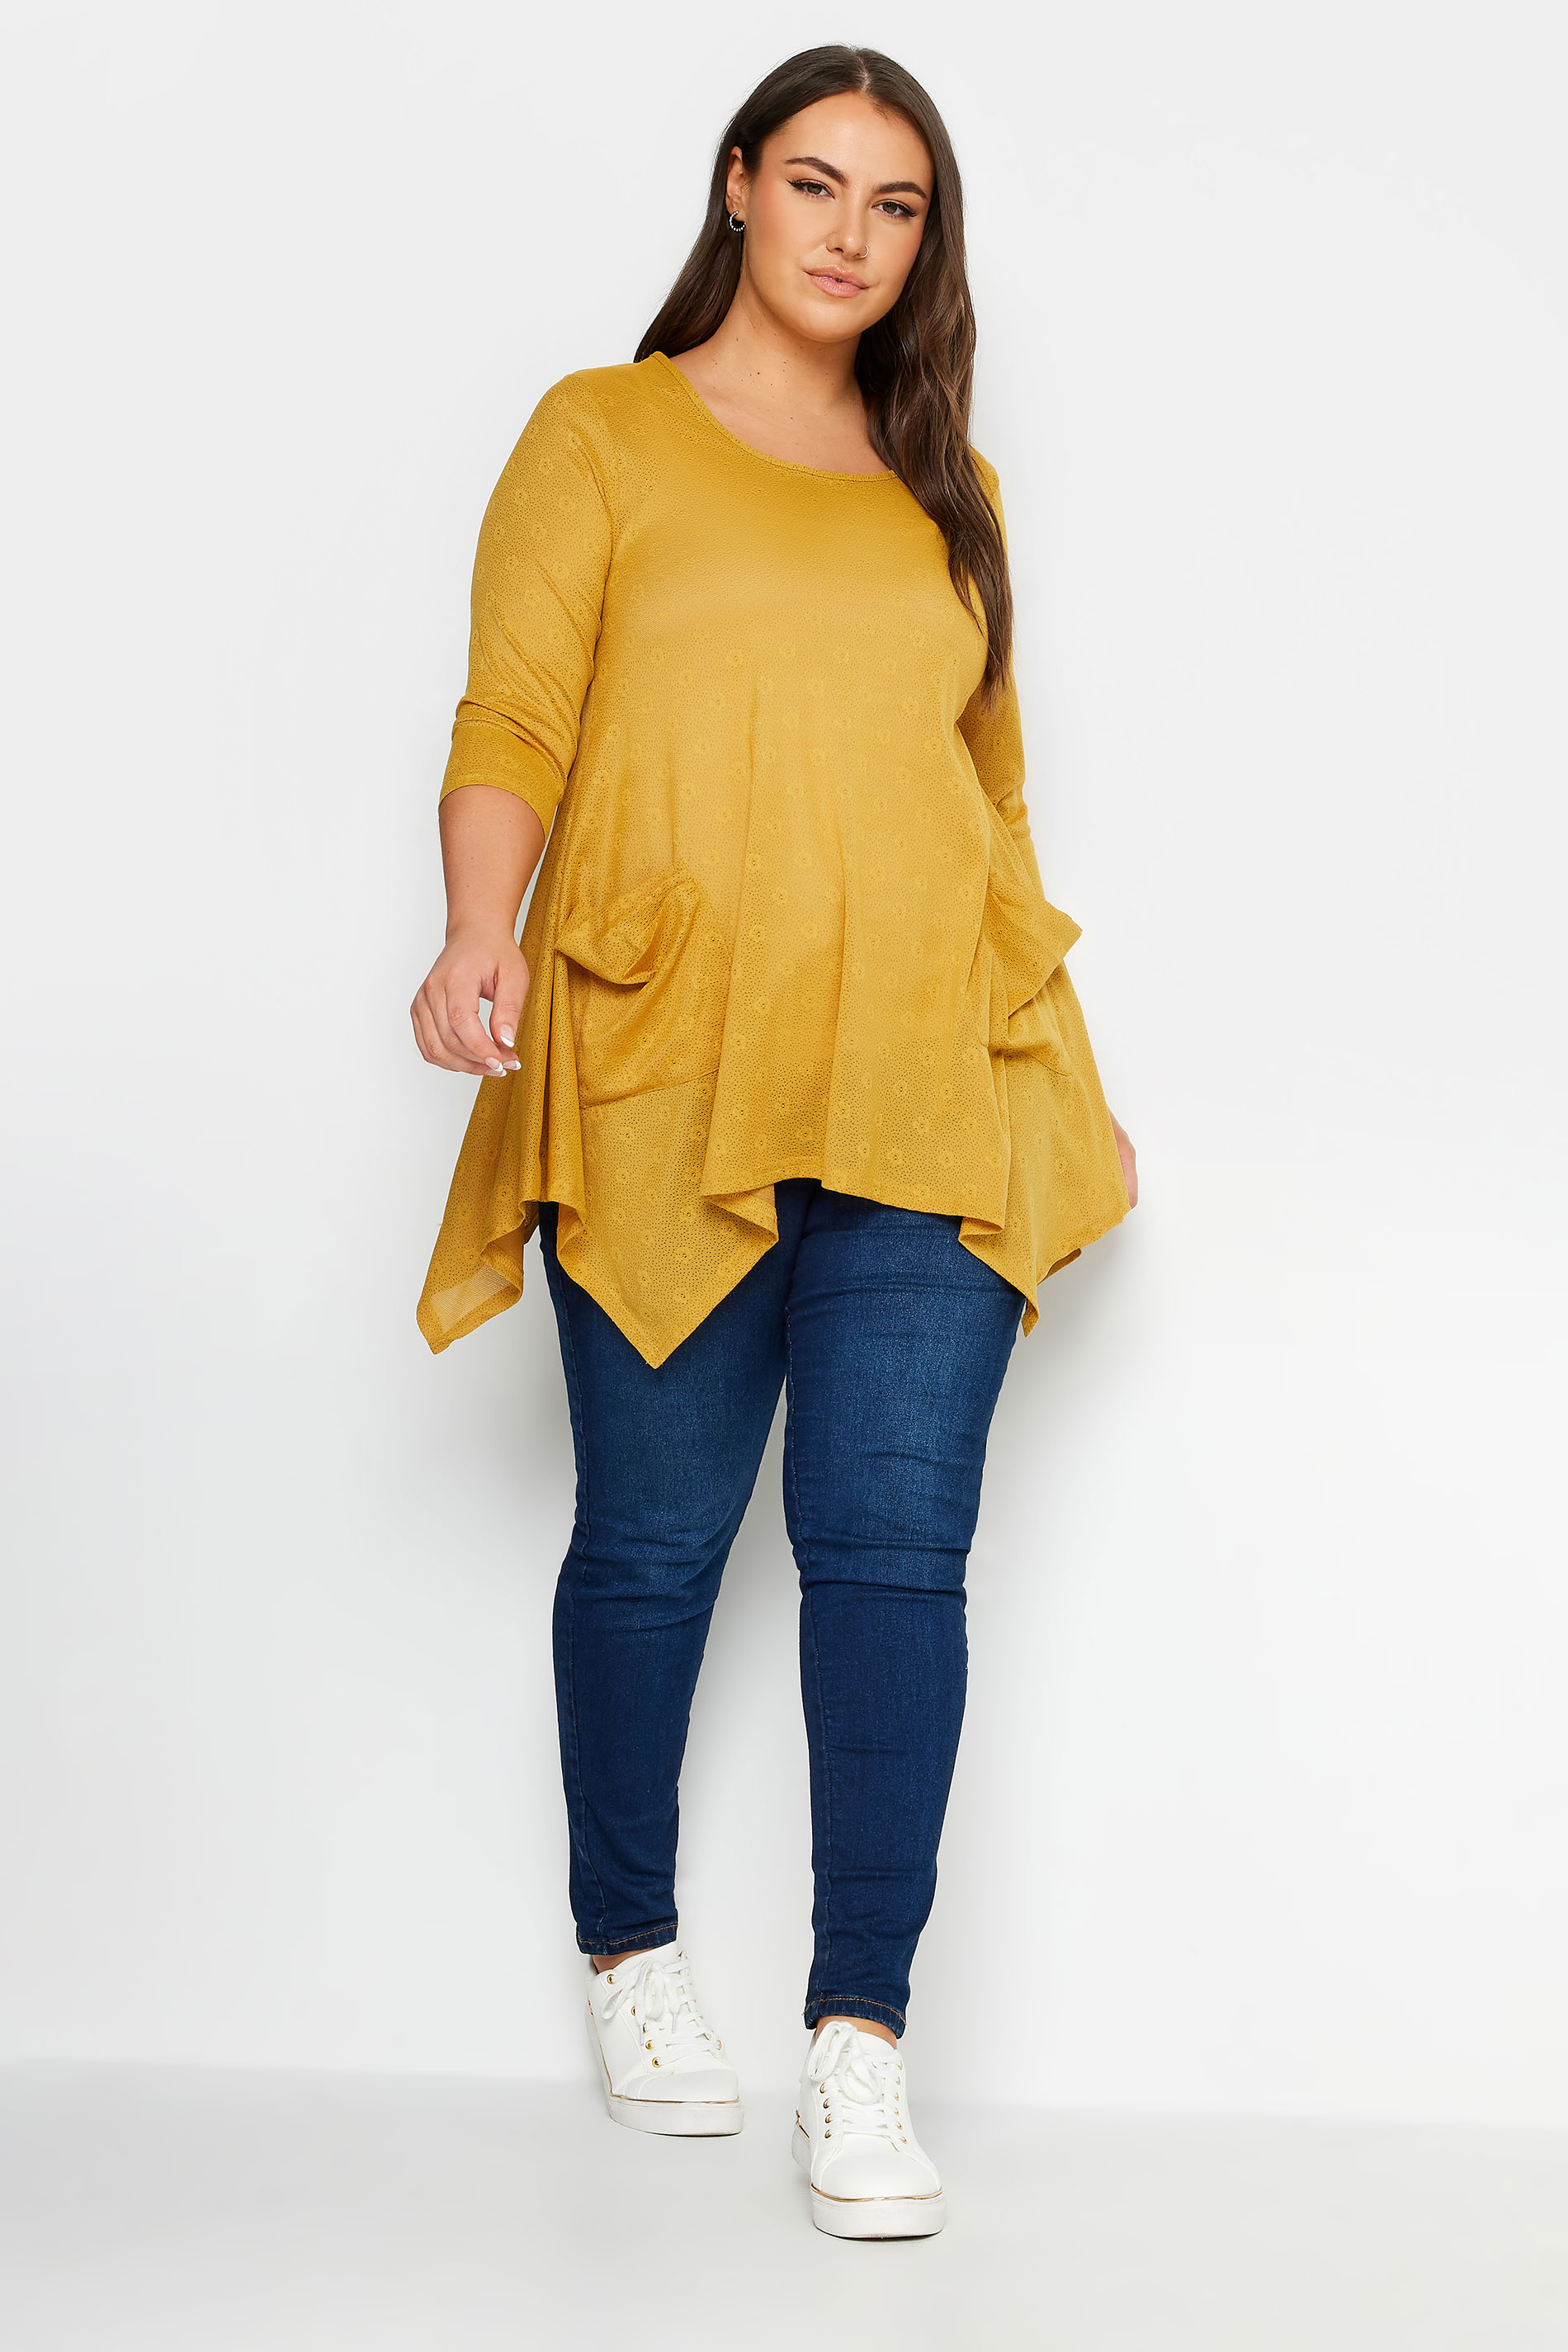 YOURS Plus Size Mustard Yellow Hanky Hem Pocket Top | Yours Clothing 2